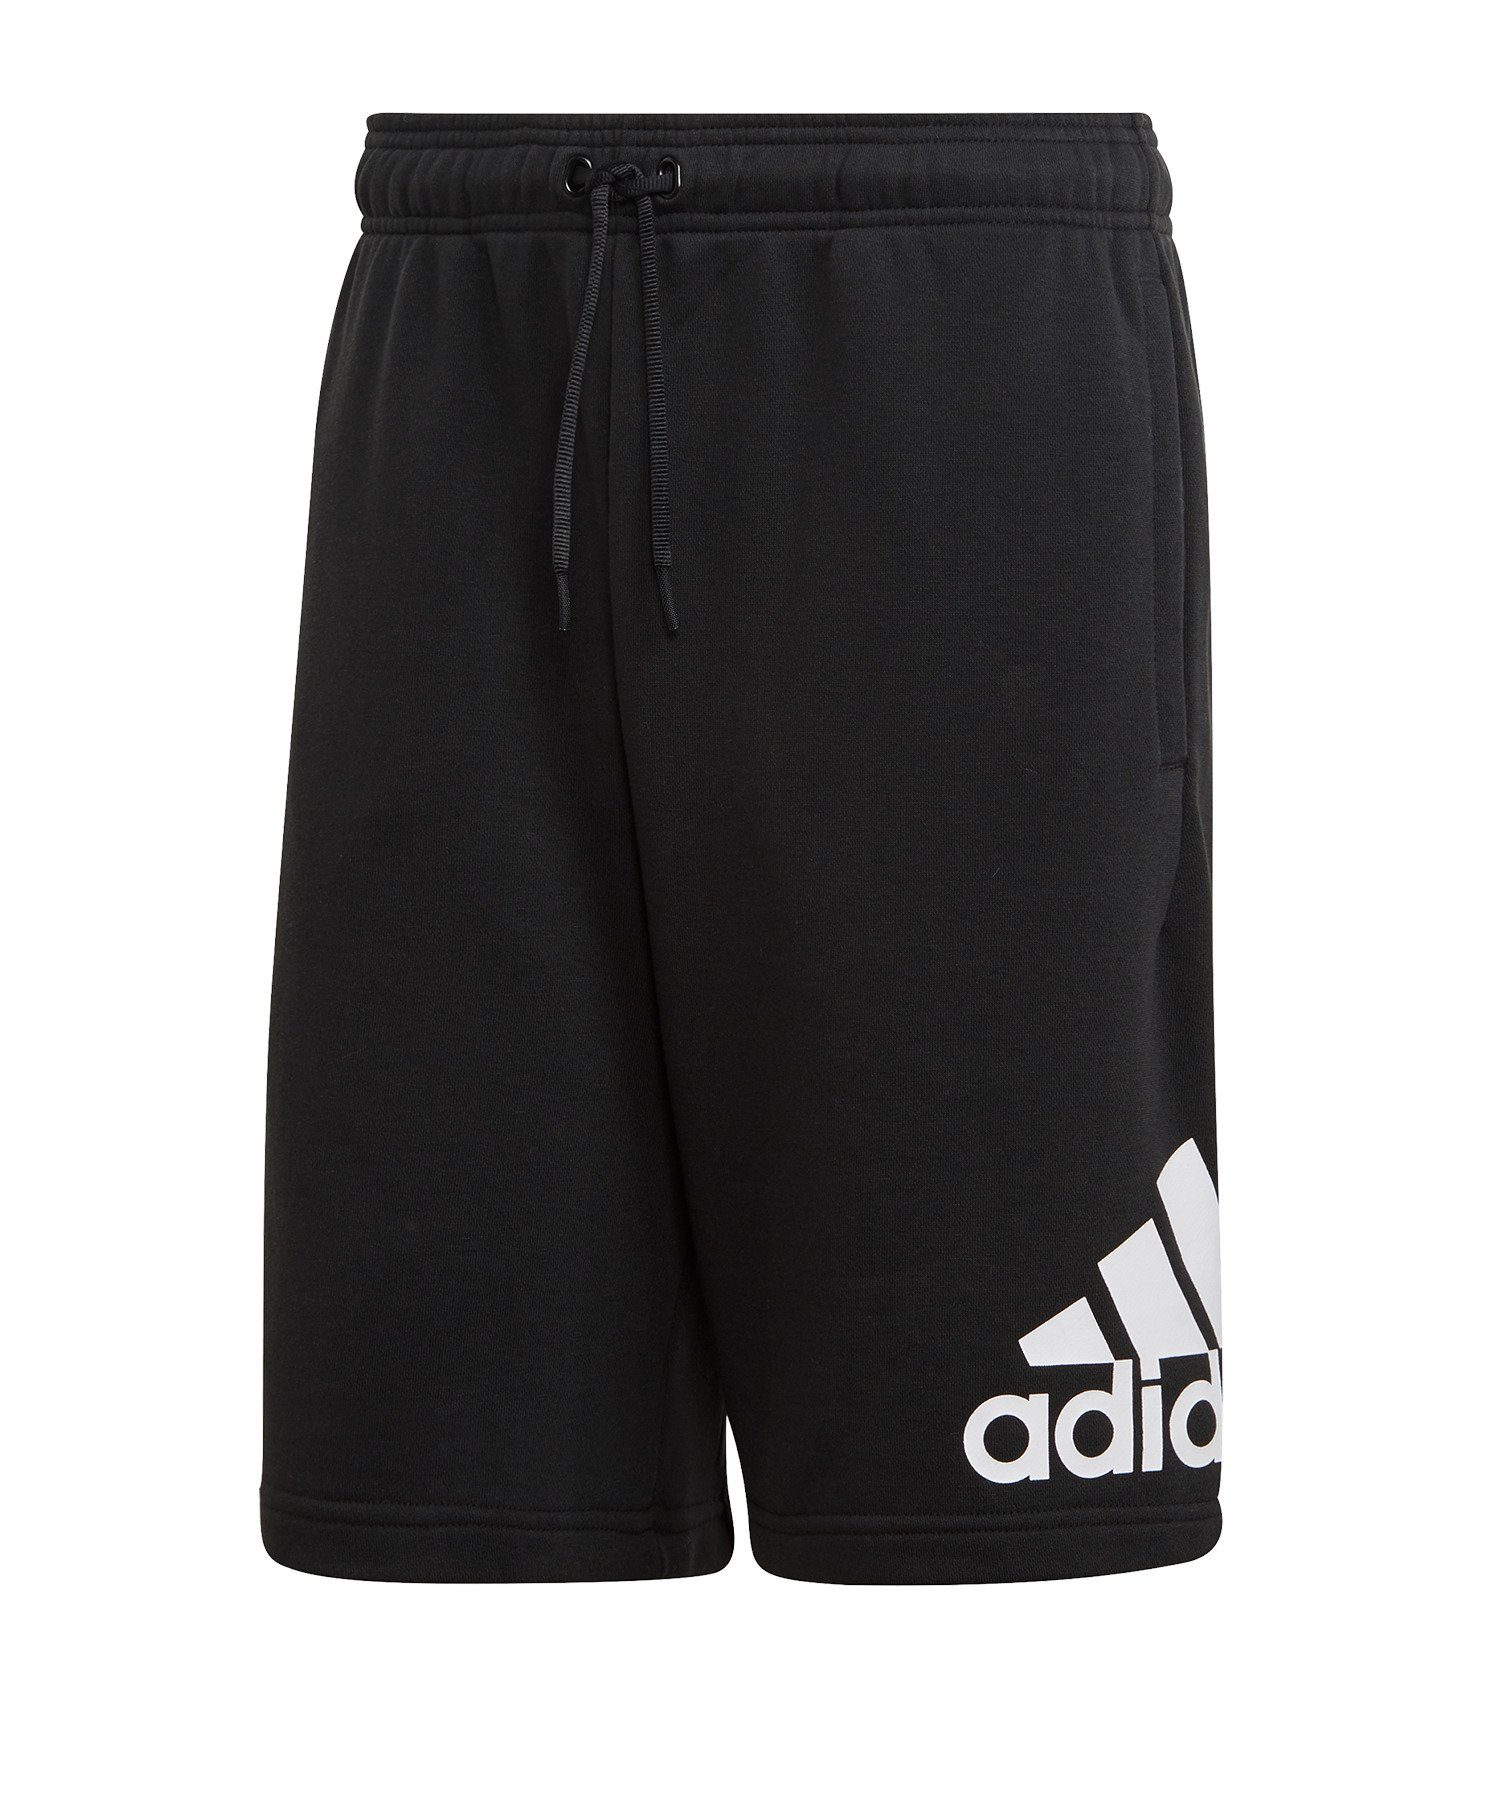 adidas Performance Jogginghose Must Haves BOS Short SchwarzWeiss